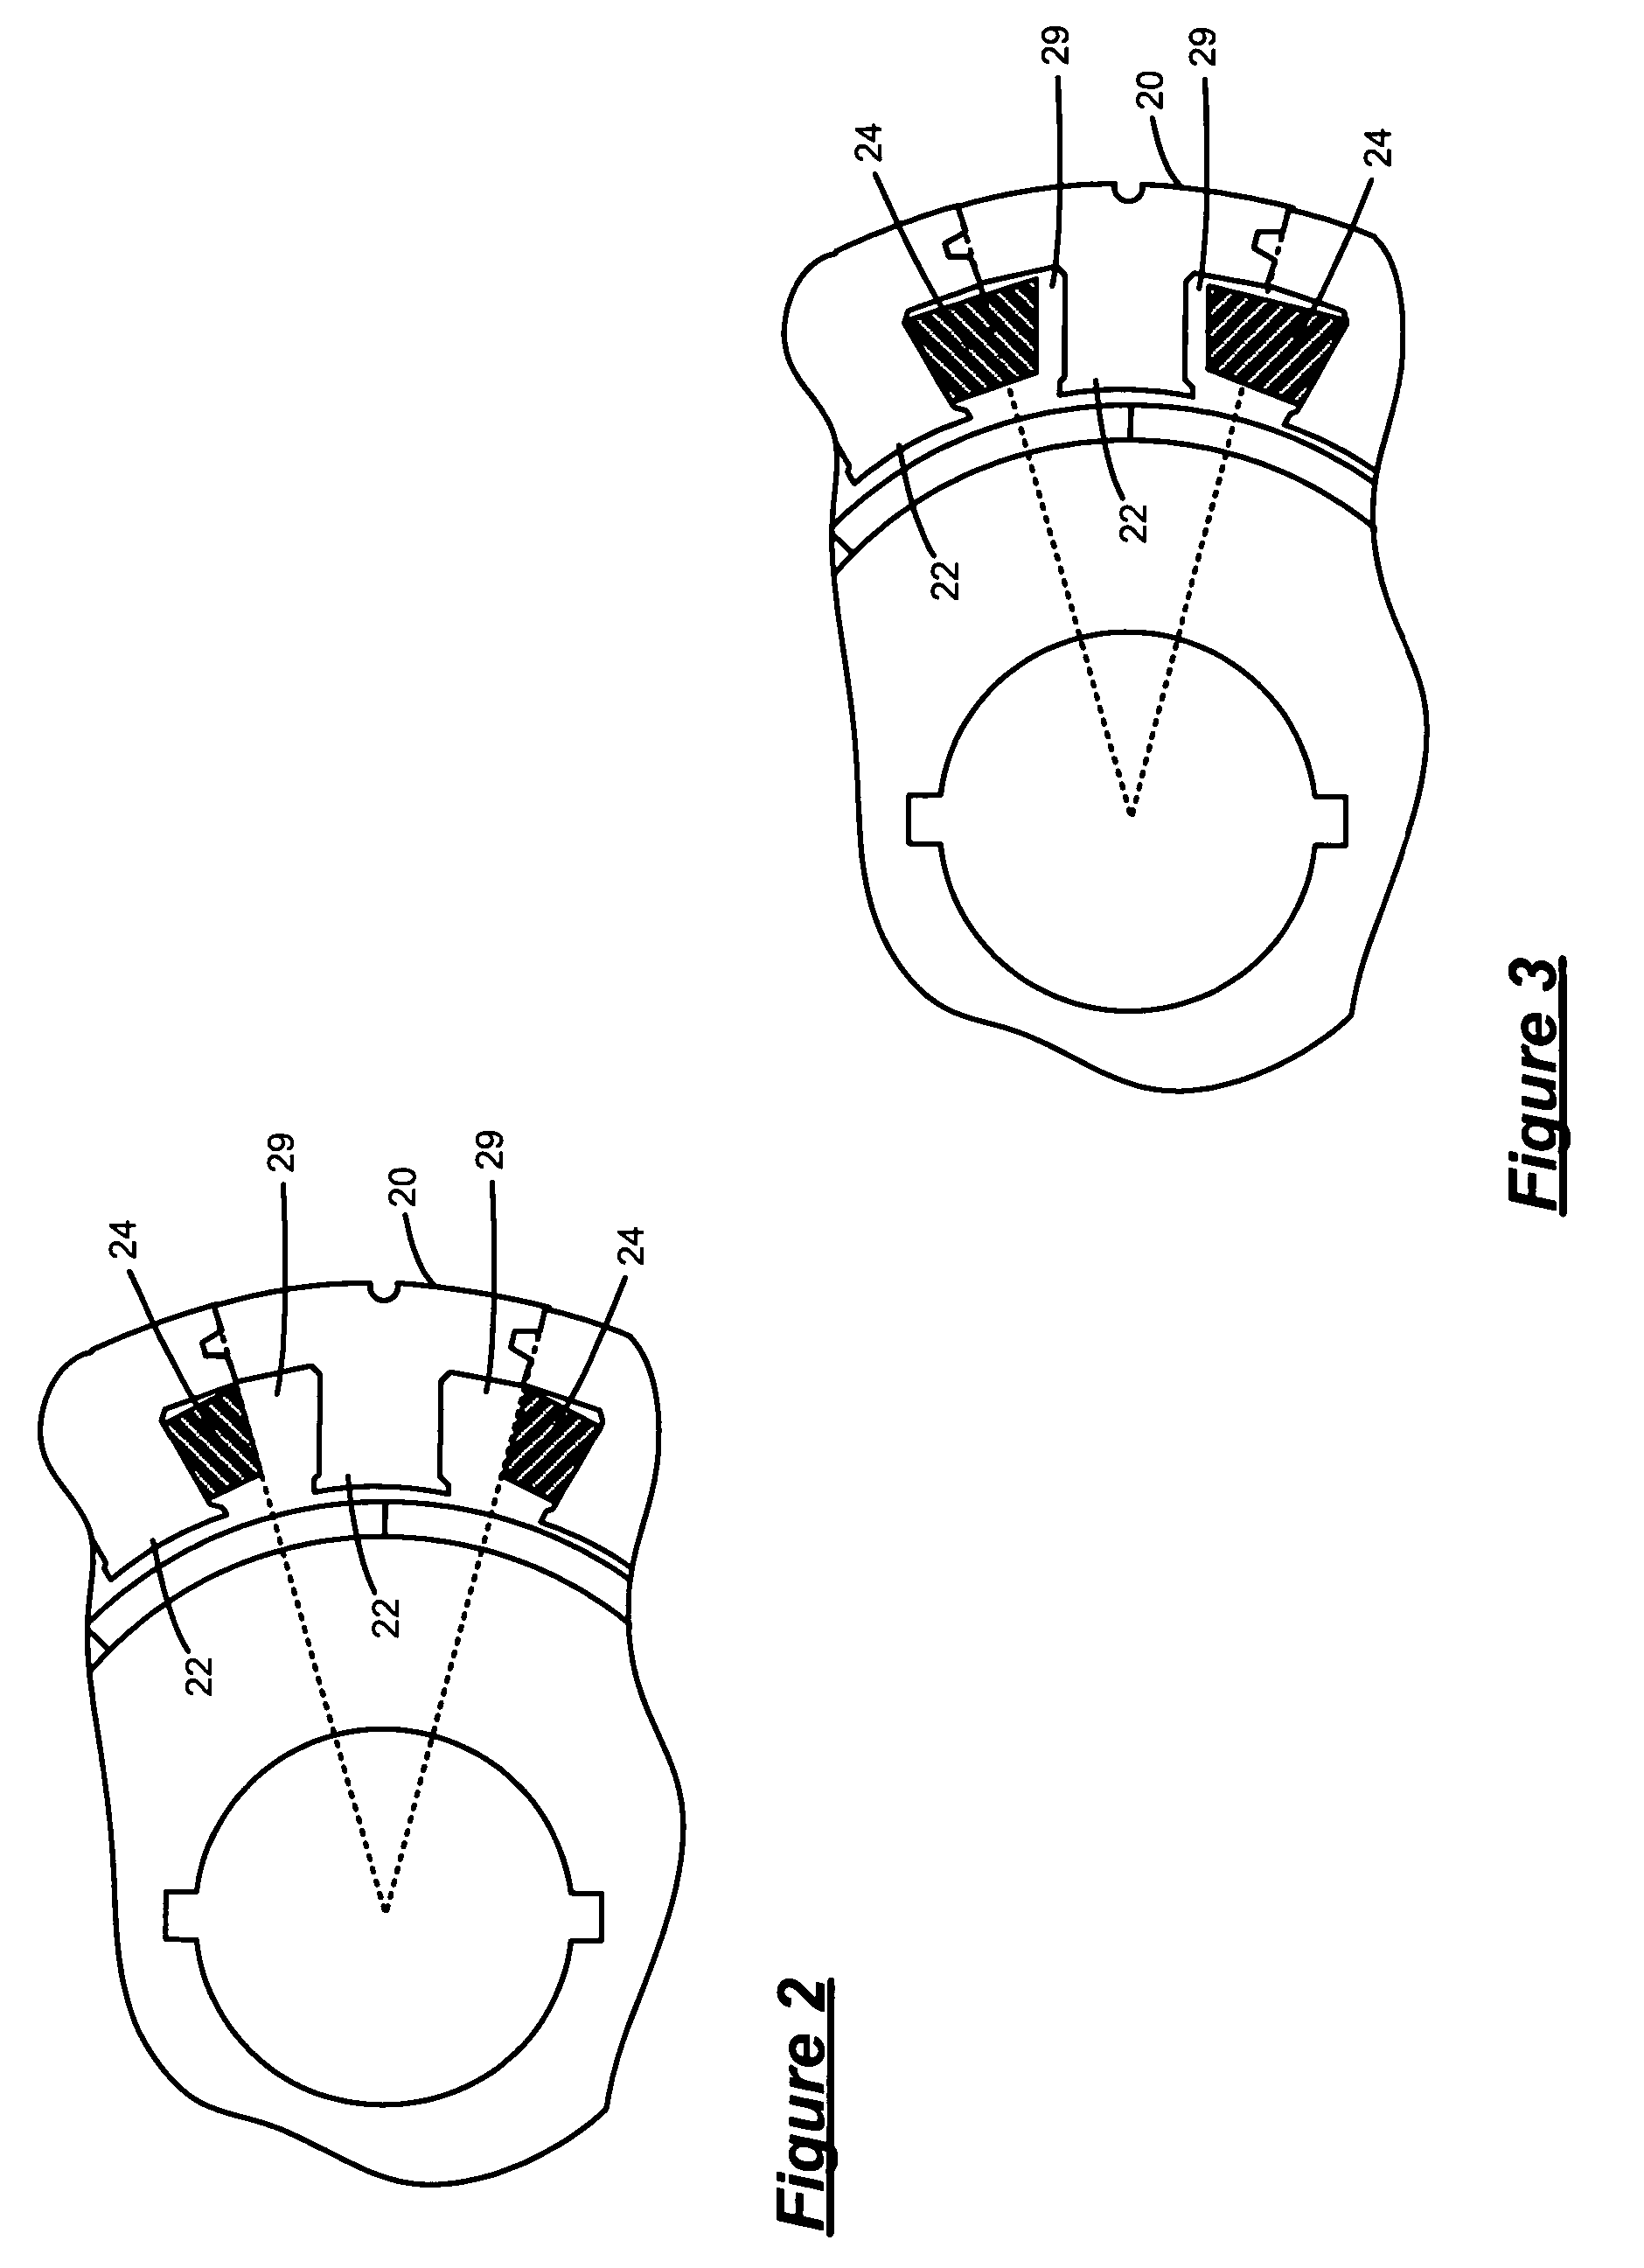 Reduced coil segmented stator